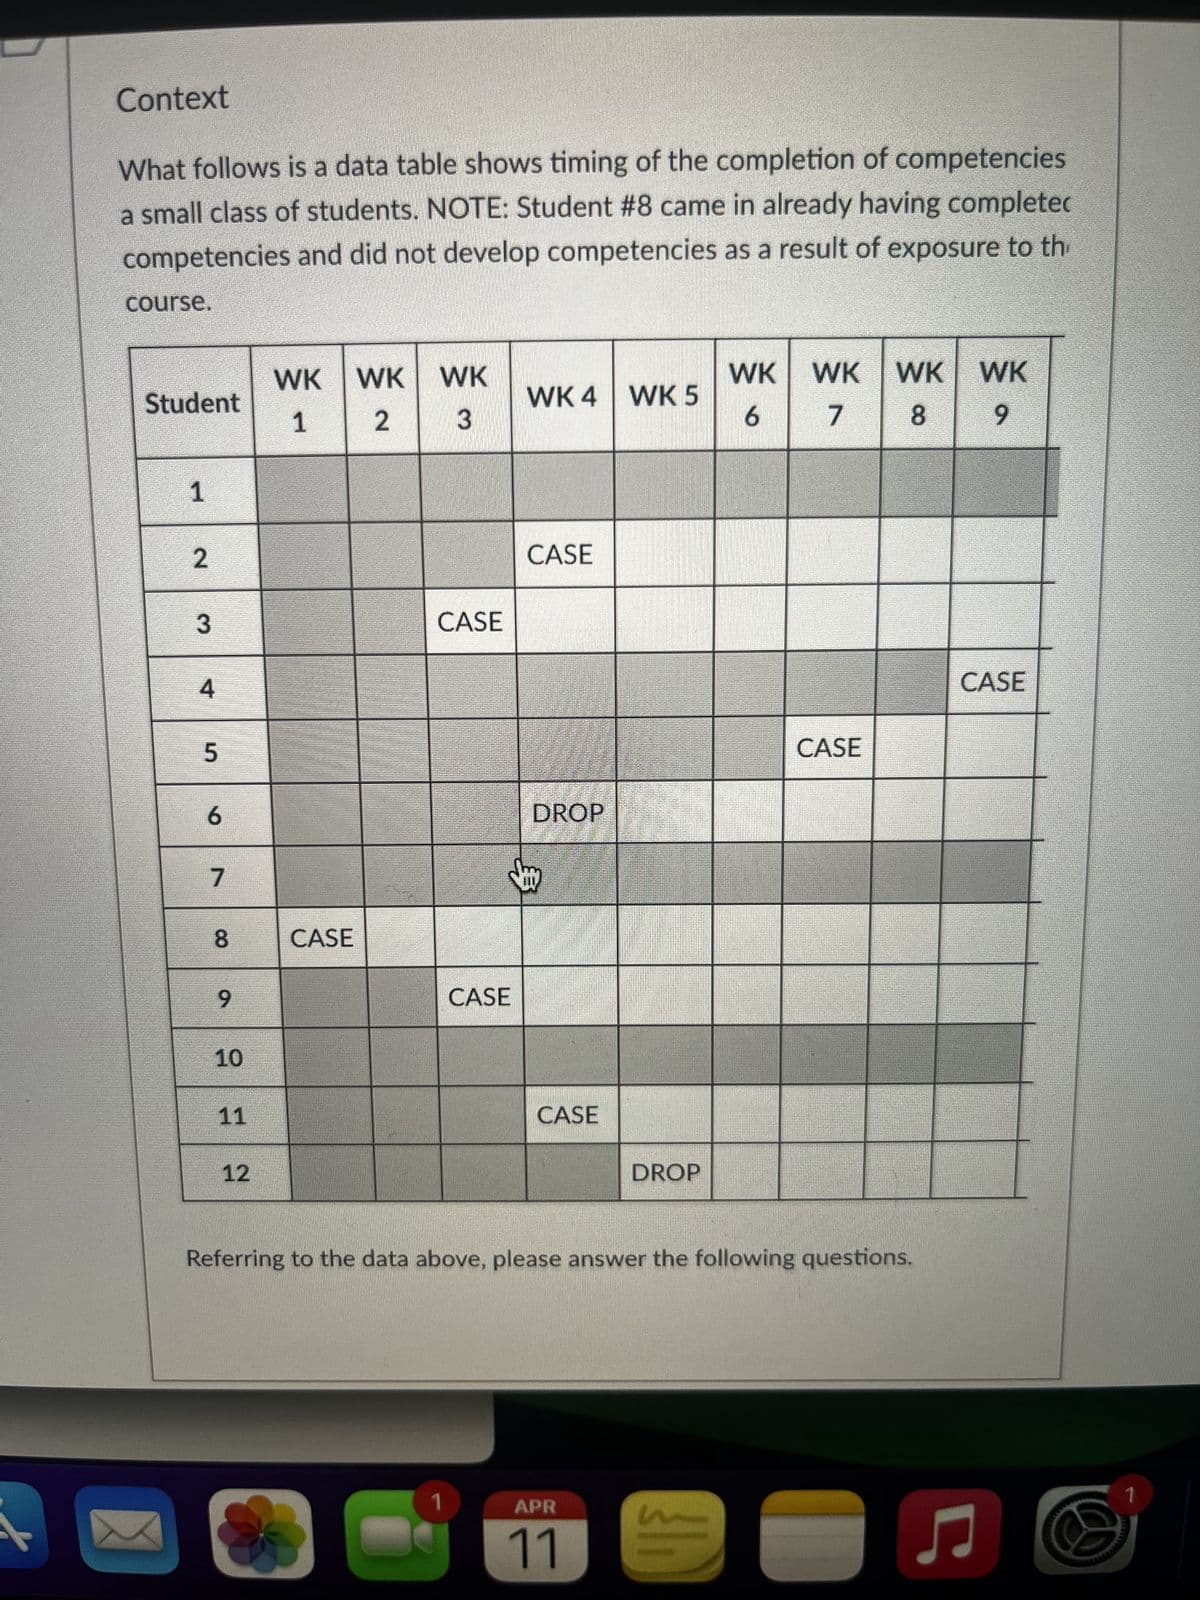 Context
What follows is a data table shows timing of the completion of competencies
a small class of students. NOTE: Student #8 came in already having completec
competencies and did not develop competencies as a result of exposure to th
course.
WK WK WK
WK WK WK WK
Student
WK 4 WK 5
1
2
3
6
7
8
9
1
2
CASE
3
CASE
4
5
6
7
00
9
ON
10
11
12
CASE
CASE
CASE
CASE
DROP
CASE
DROP
Referring to the data above, please answer the following questions.
1
APR
11
Ը
1